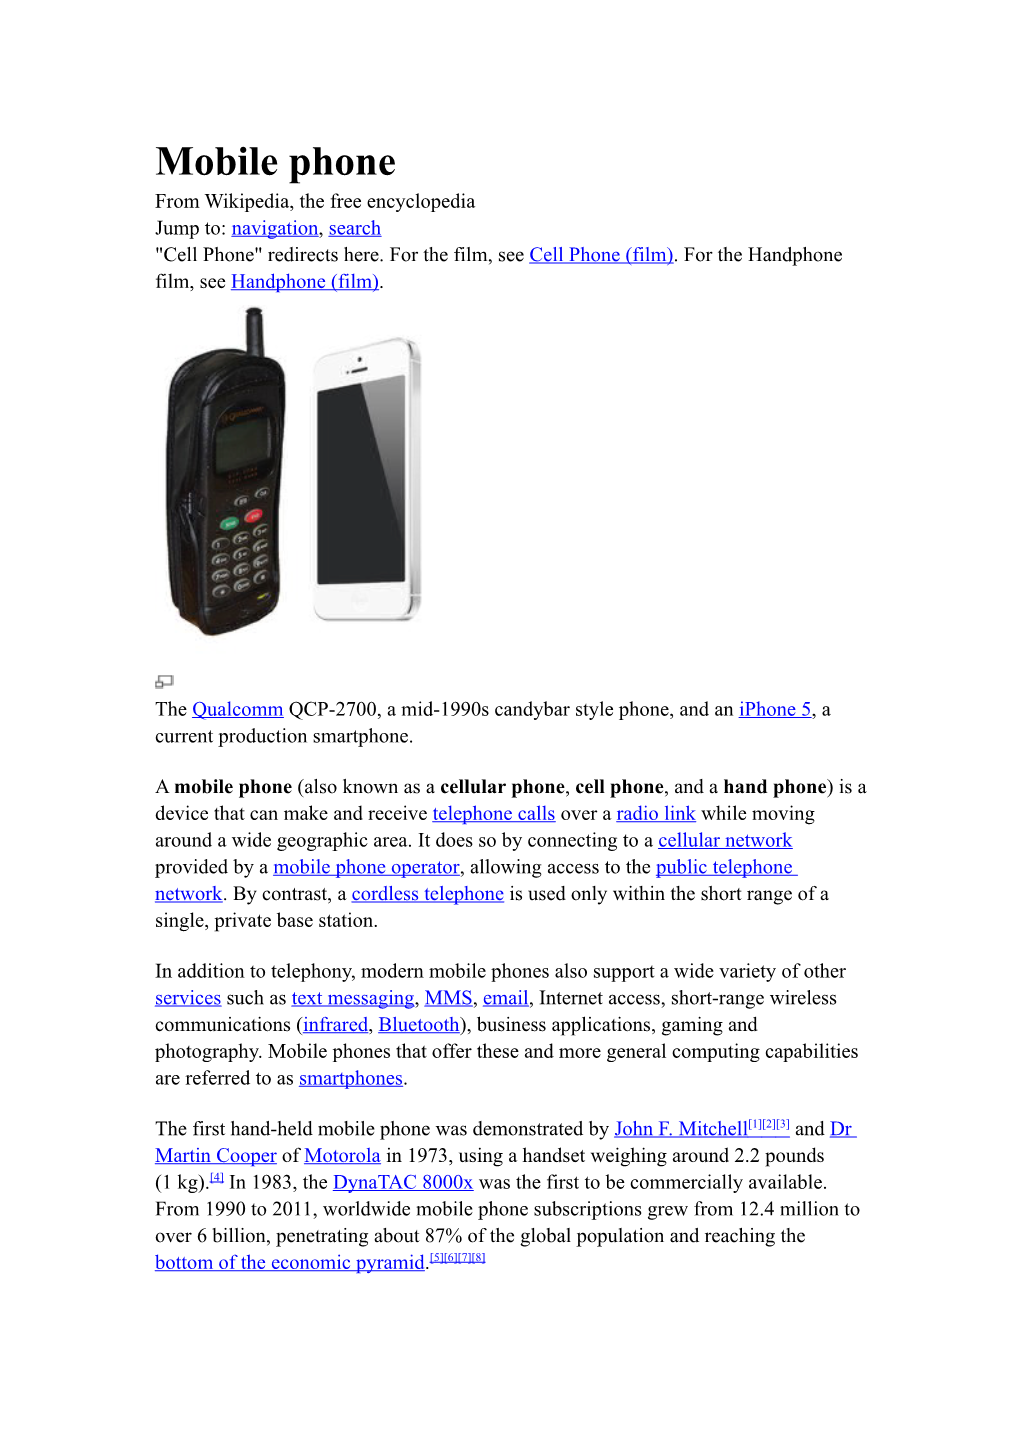 Mobile Phone from Wikipedia, the Free Encyclopedia Jump To: Navigation, Search "Cell Phone" Redirects Here